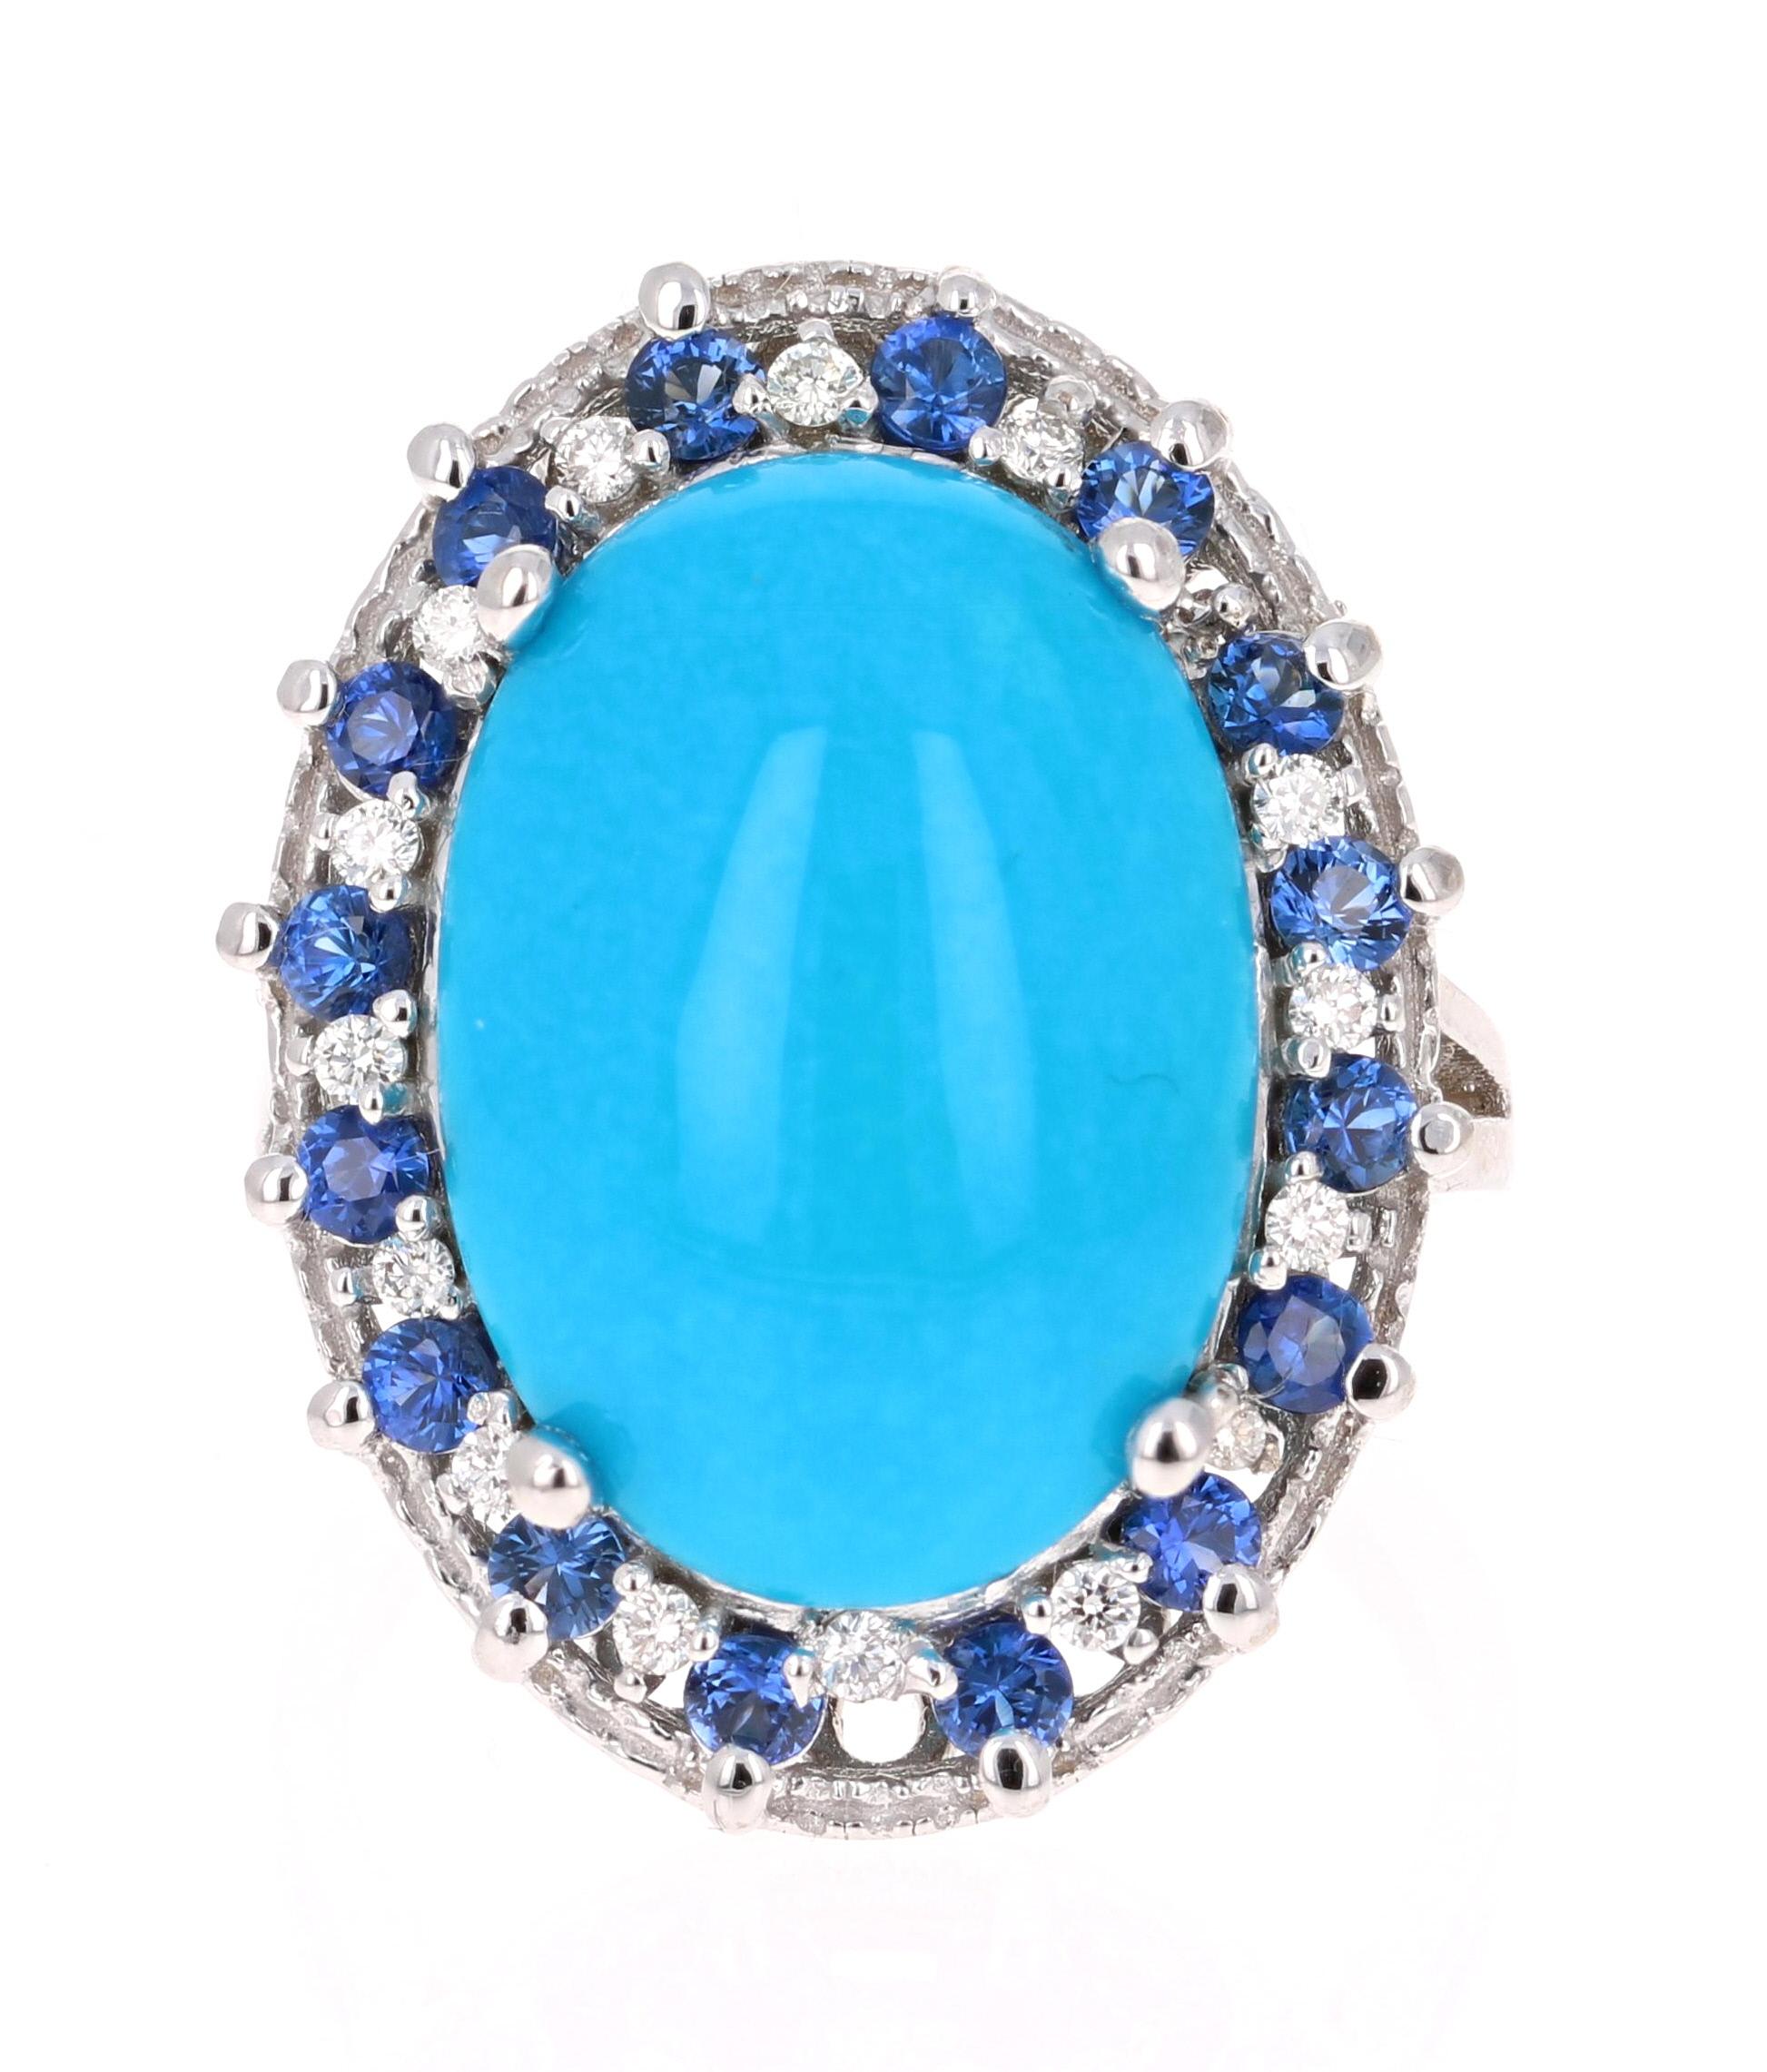 Beautiful Turquoise, Blue Sapphire and Diamond Cocktail Ring!
This ring has an  Oval Cut Cabochon Turquoise that weighs 6.48 Carats and is artistically enhanced with Round Cut Diamonds and Blue Sapphires.  There are 16 Blue Sapphires weighing 0.79